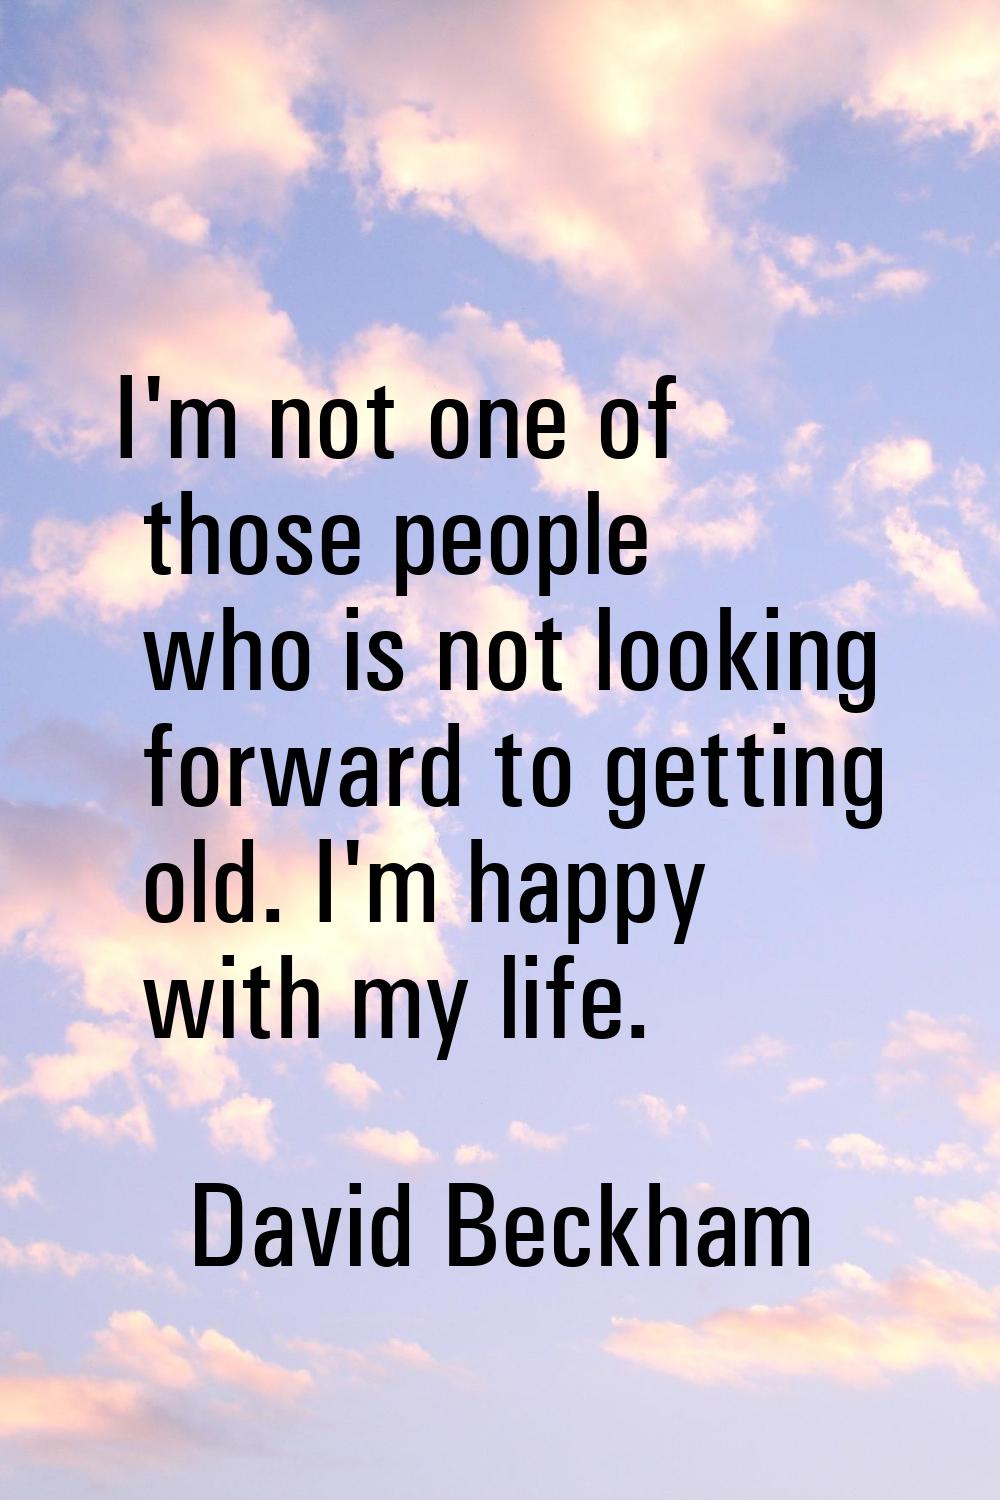 I'm not one of those people who is not looking forward to getting old. I'm happy with my life.